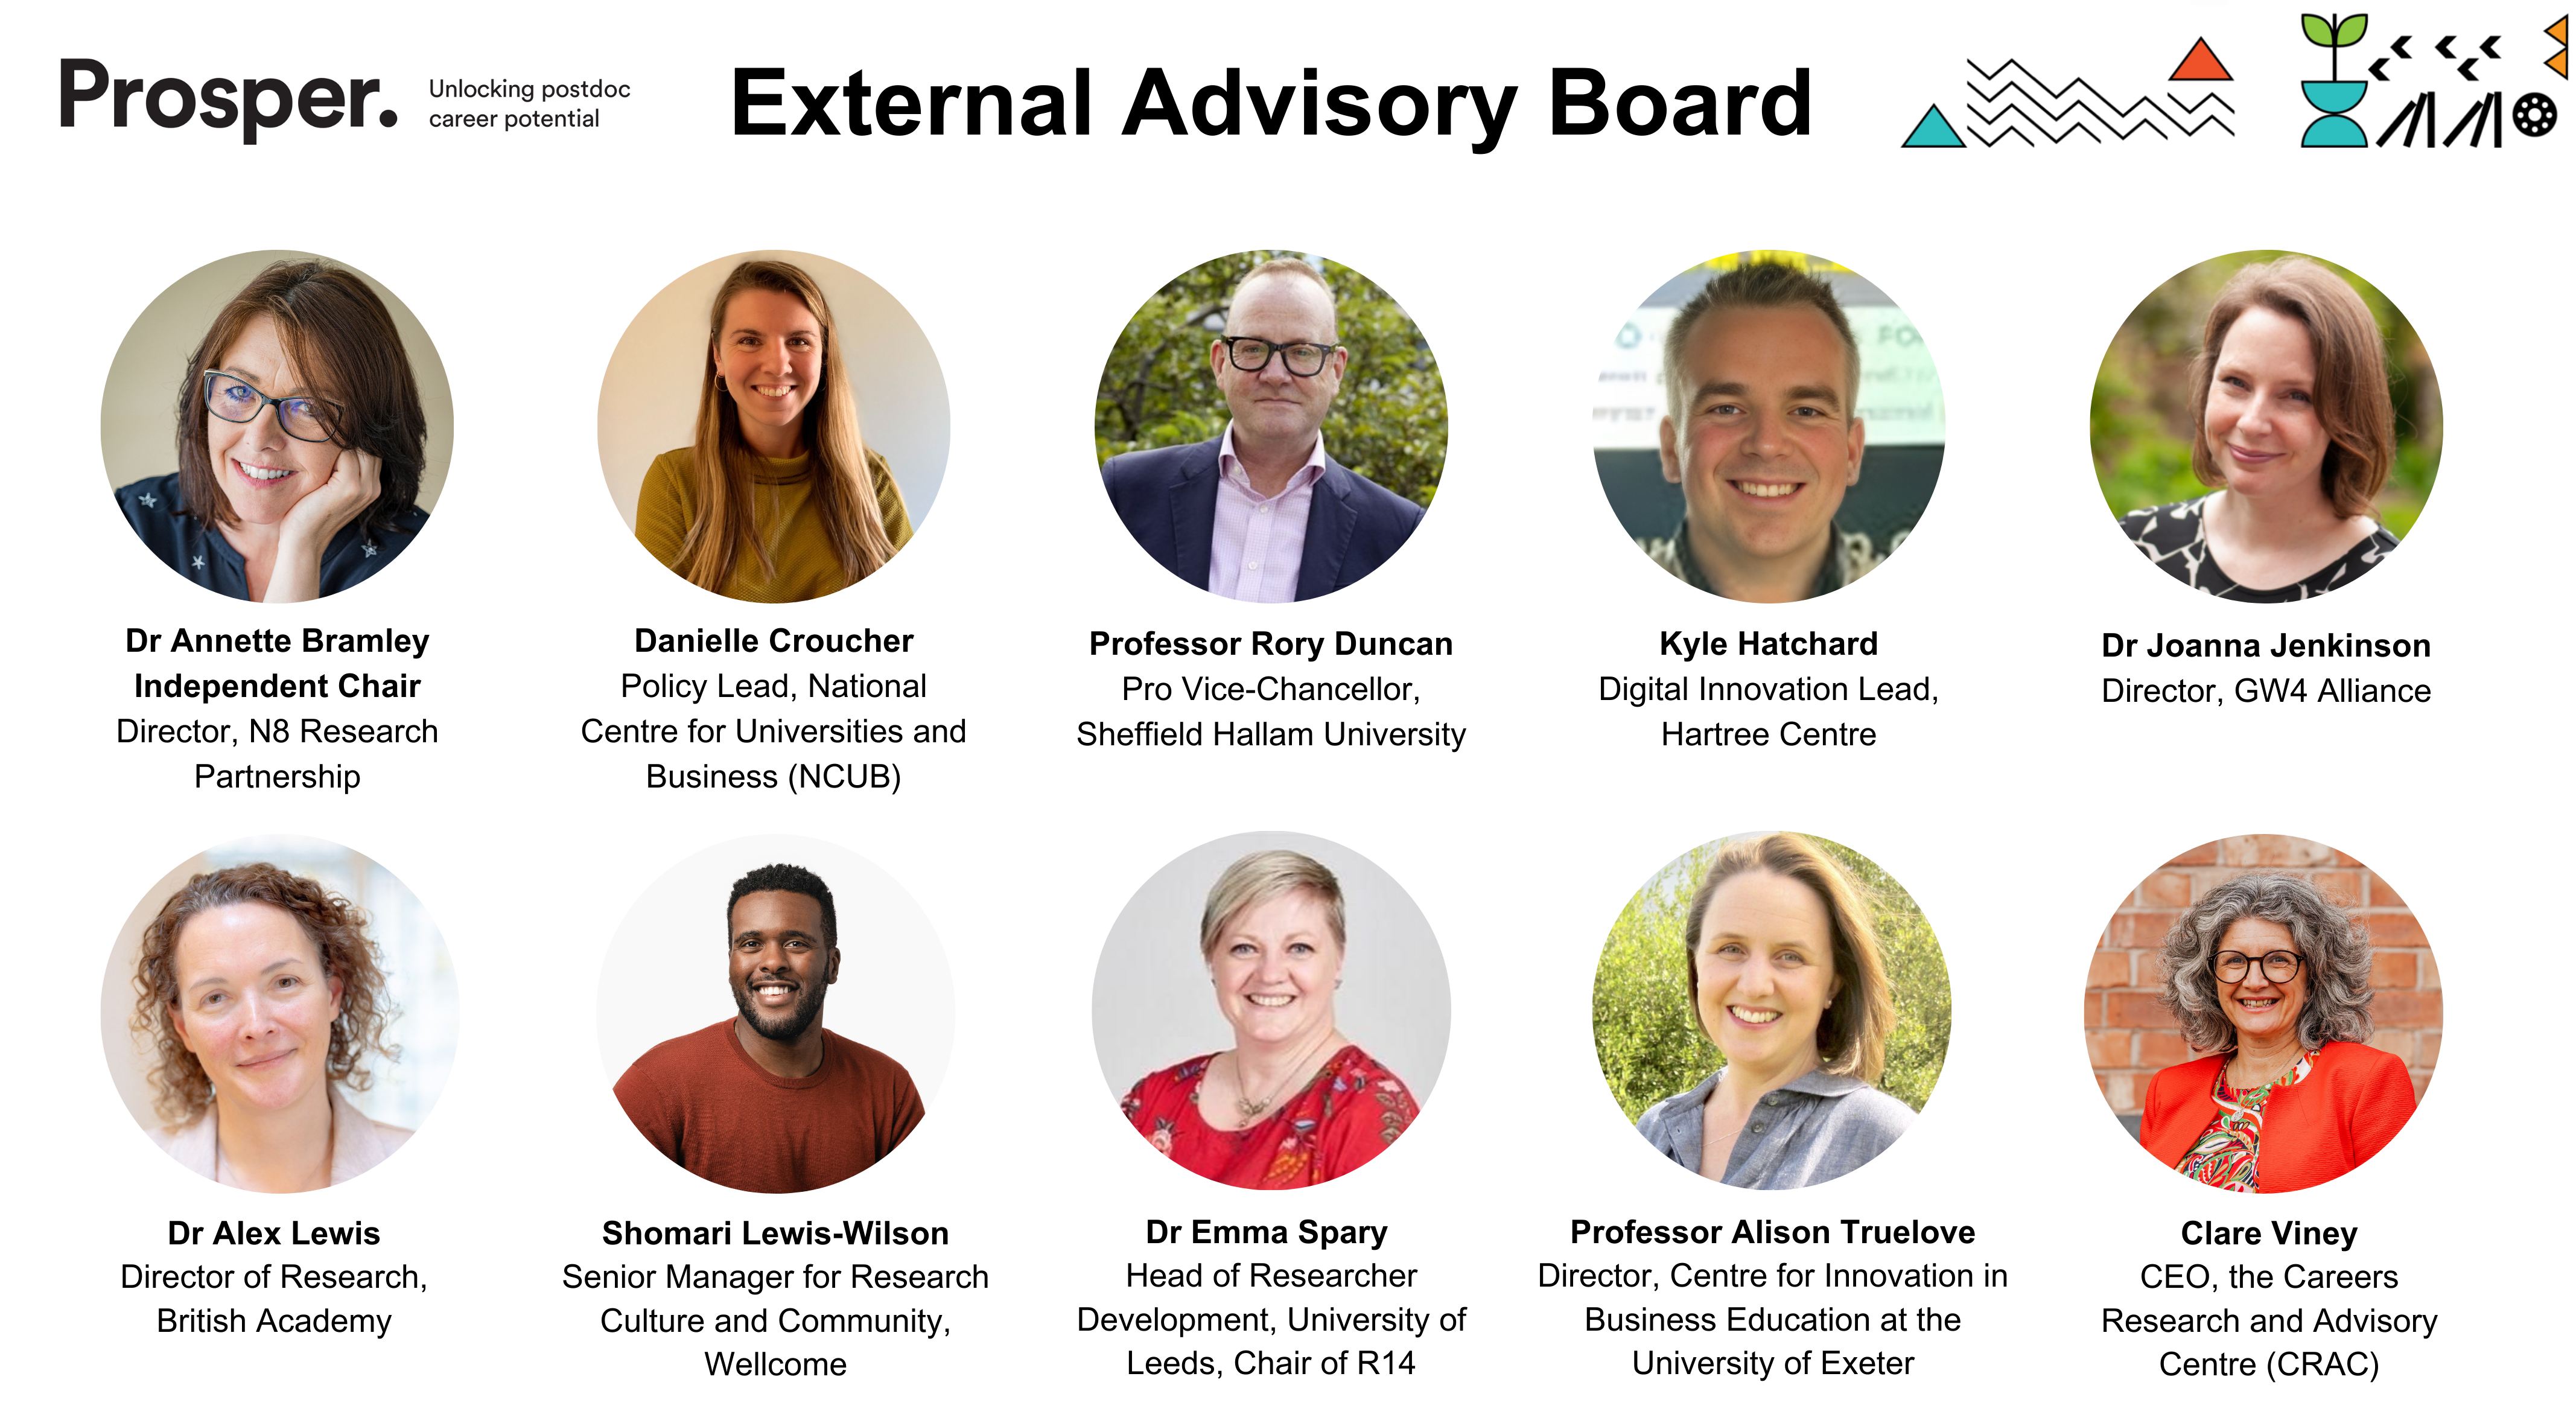 Headshots, names and titles of the ten Prosper rollout External Advisory Board members
